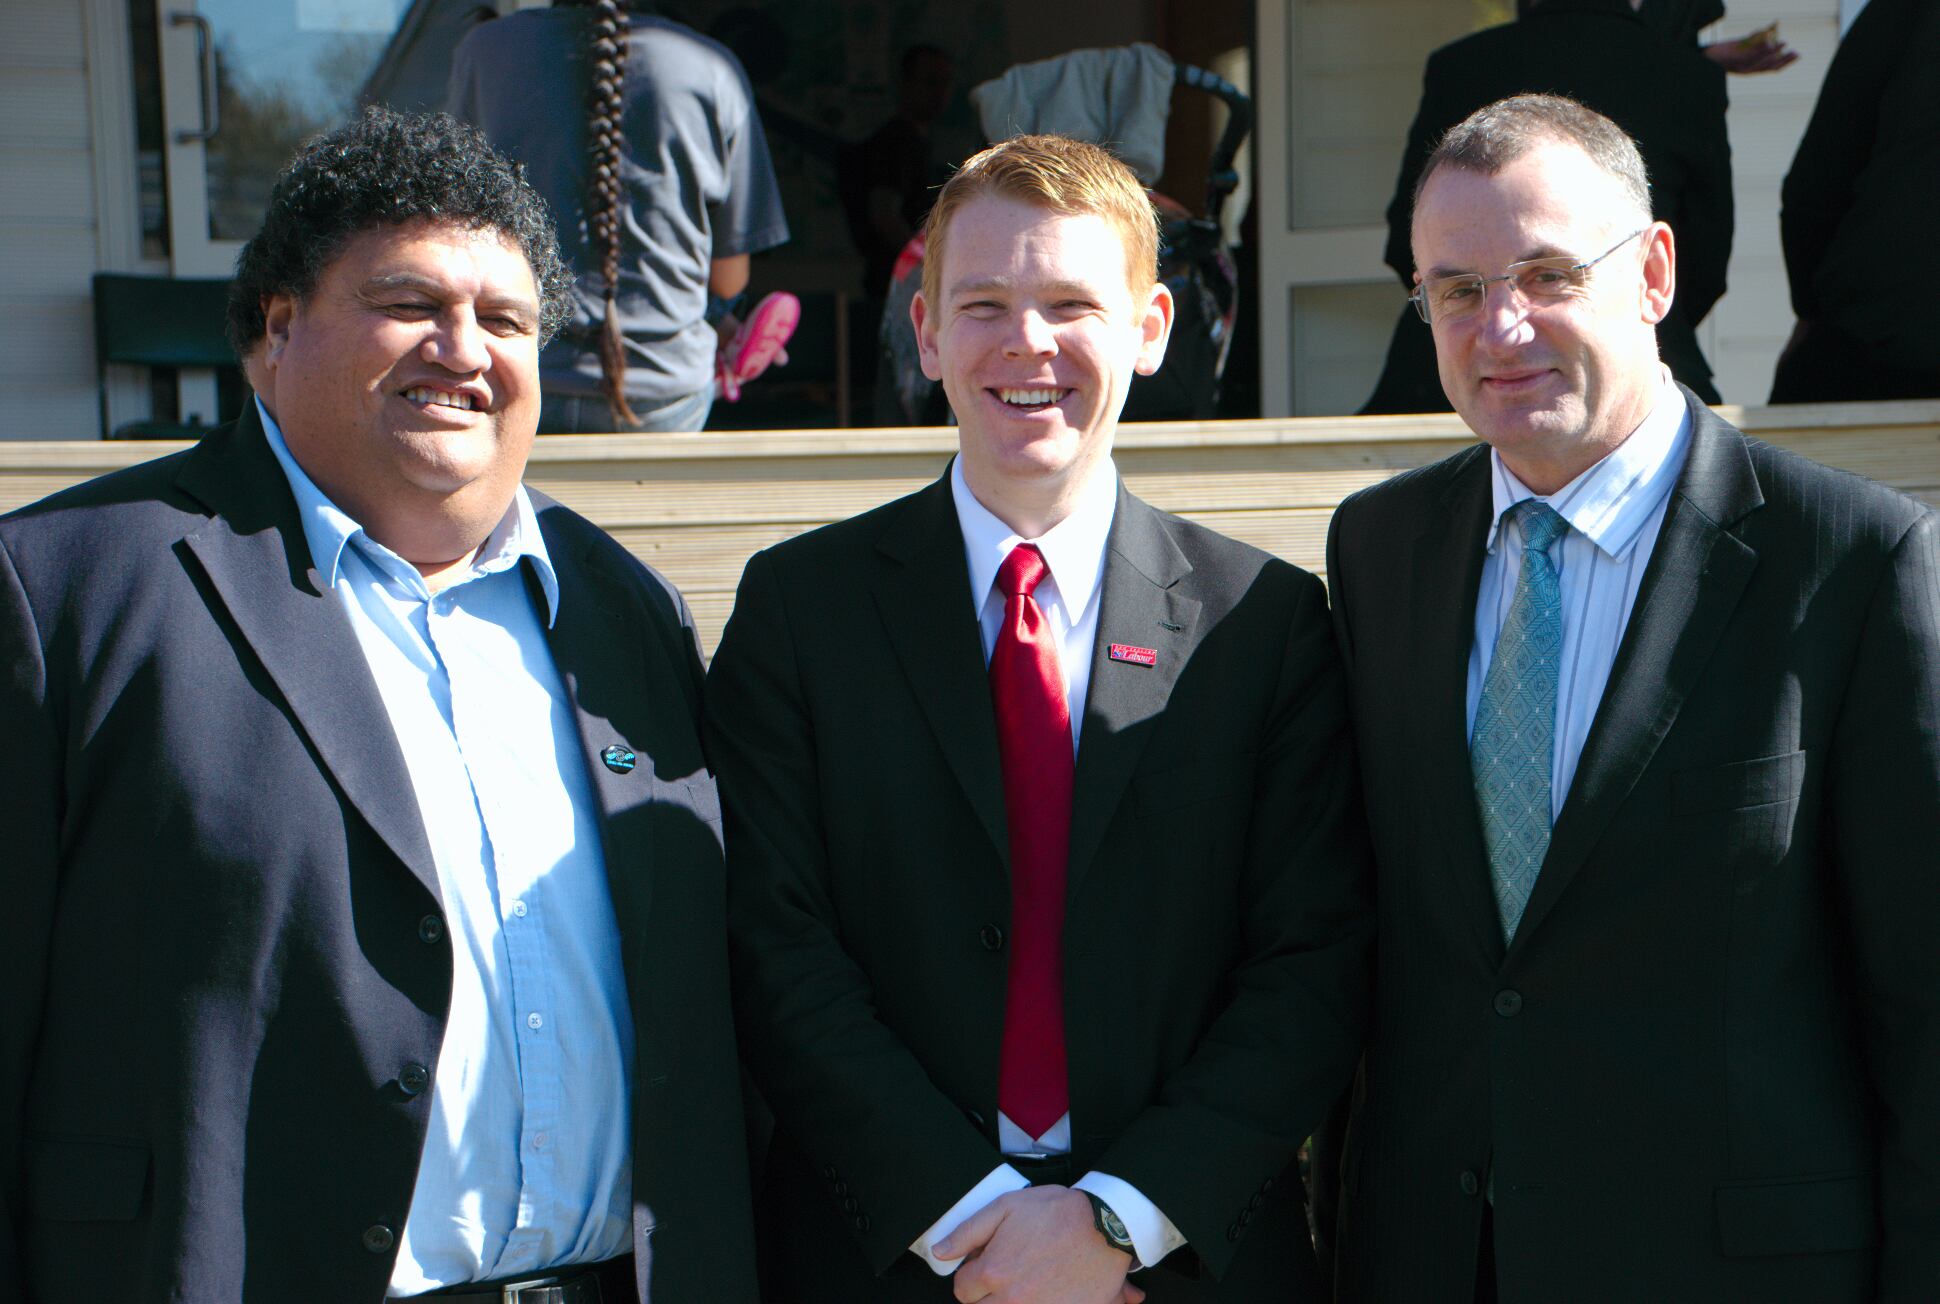 Parekura Horomia pictured by a youthful Chris Hipkins, and former MP Trevor Mallard (from left) in 2008.